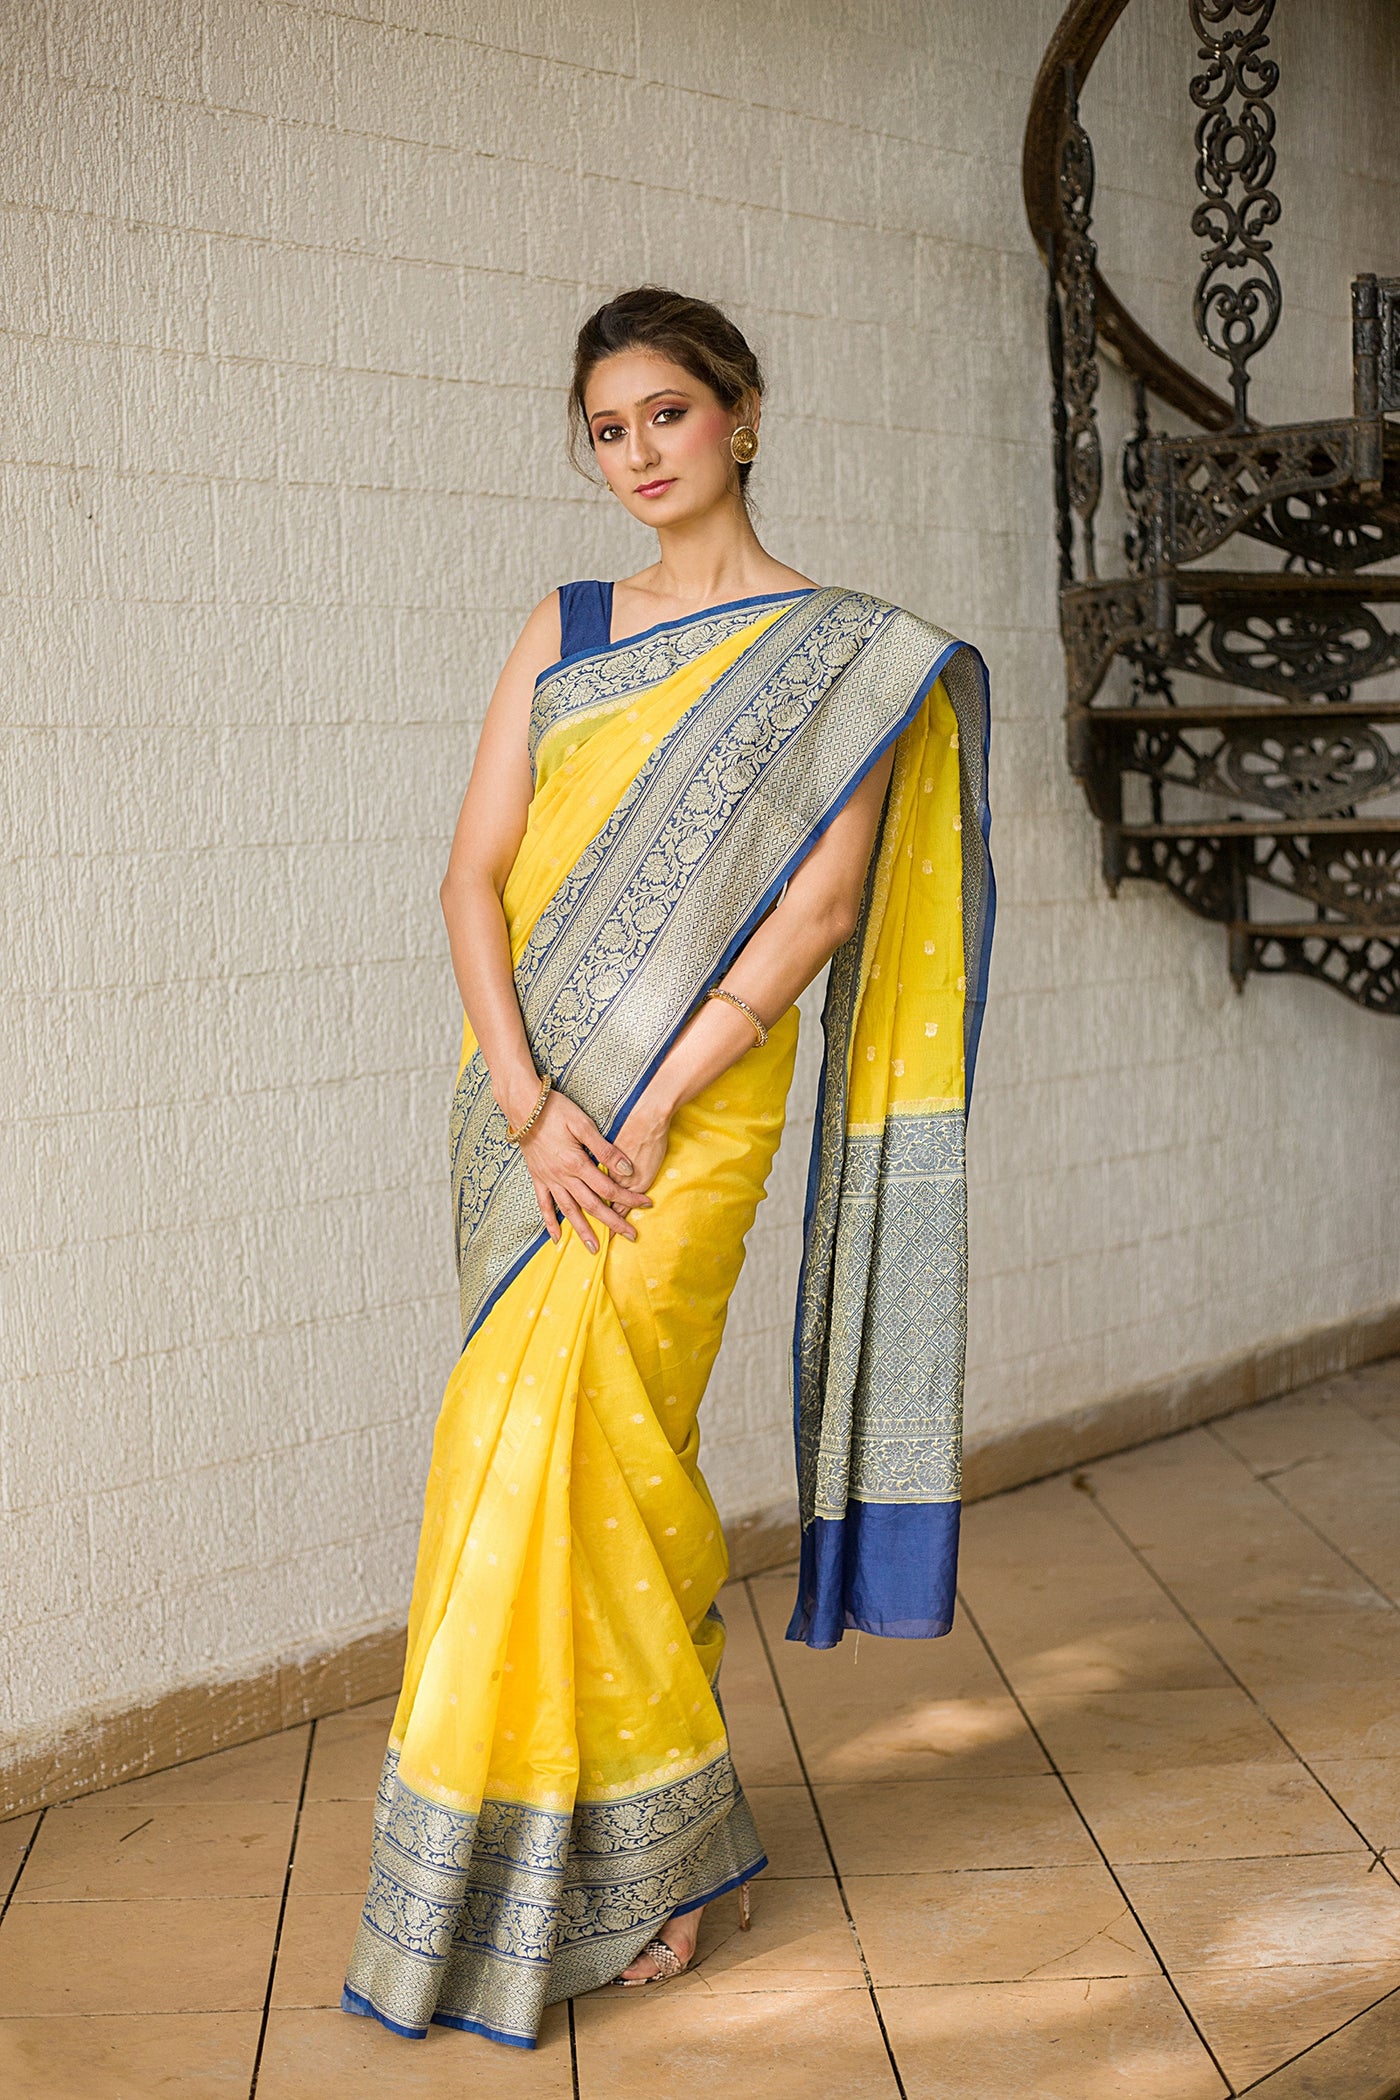 Yellow Self Woven Saree Indian Clothing in Denver, CO, Aurora, CO, Boulder, CO, Fort Collins, CO, Colorado Springs, CO, Parker, CO, Highlands Ranch, CO, Cherry Creek, CO, Centennial, CO, and Longmont, CO. NATIONWIDE SHIPPING USA- India Fashion X